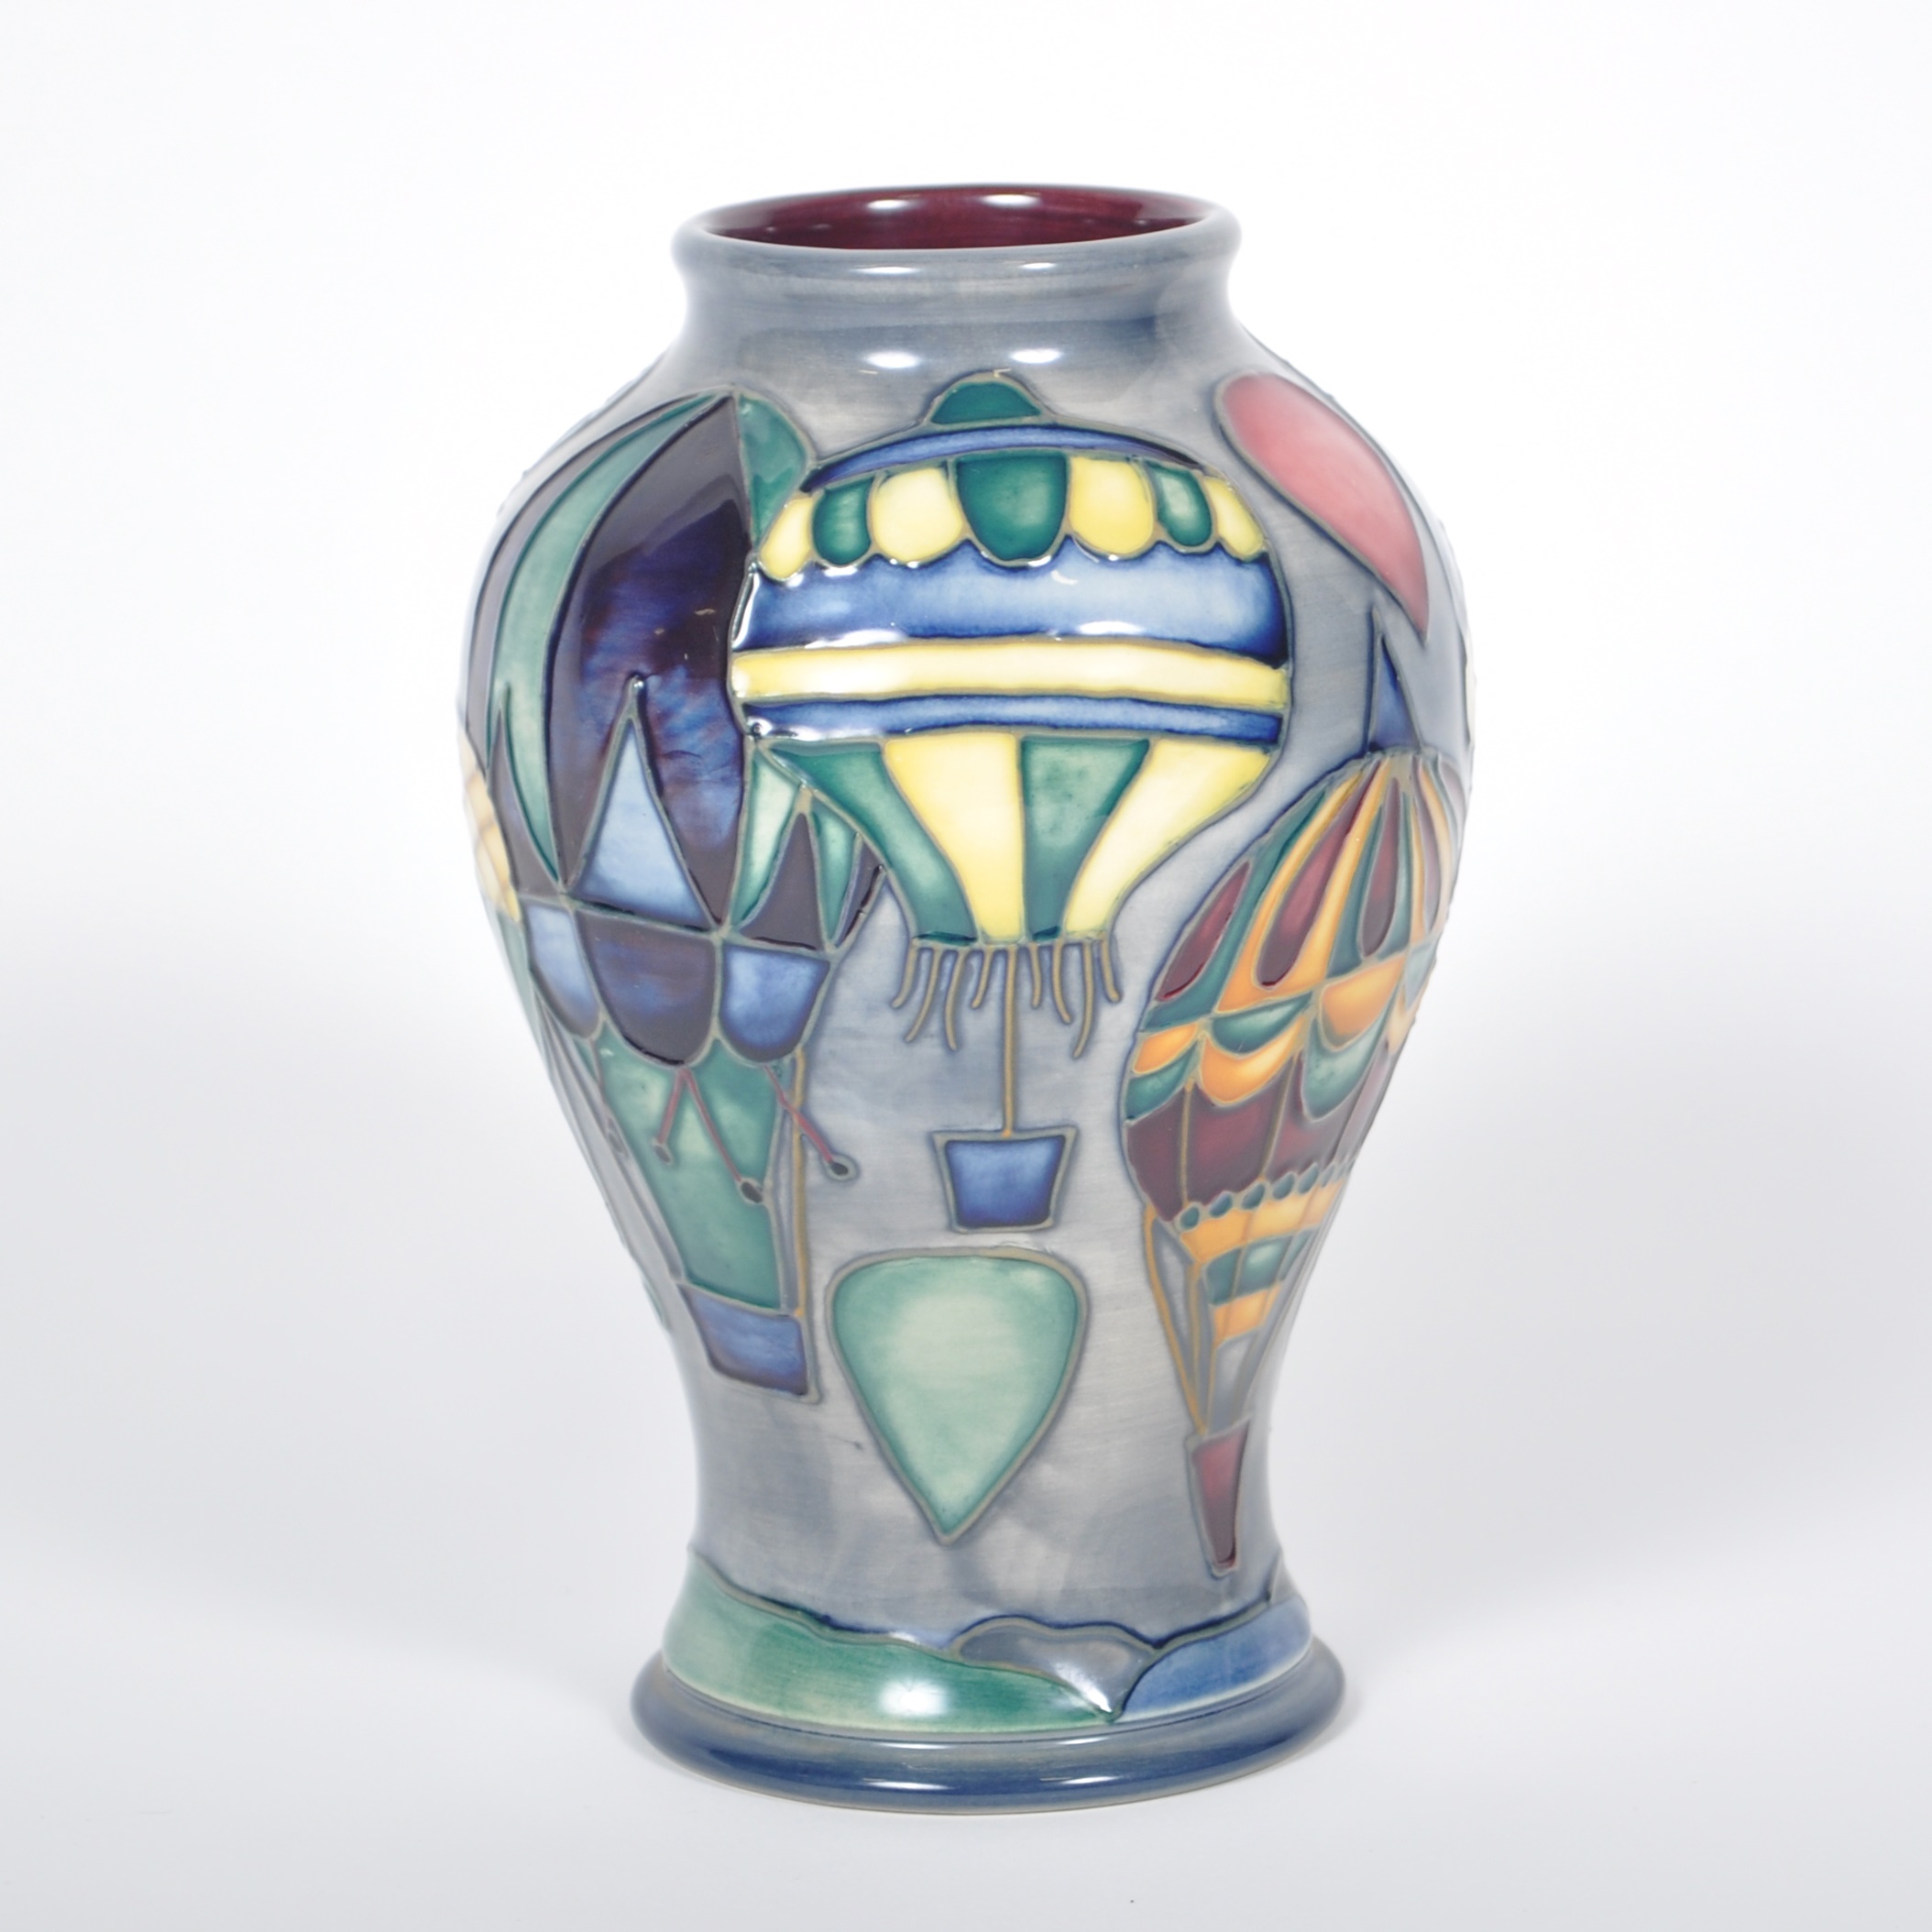 A Moorcroft Pottery vase, 'Balloon' designed by Jeanne McDougall